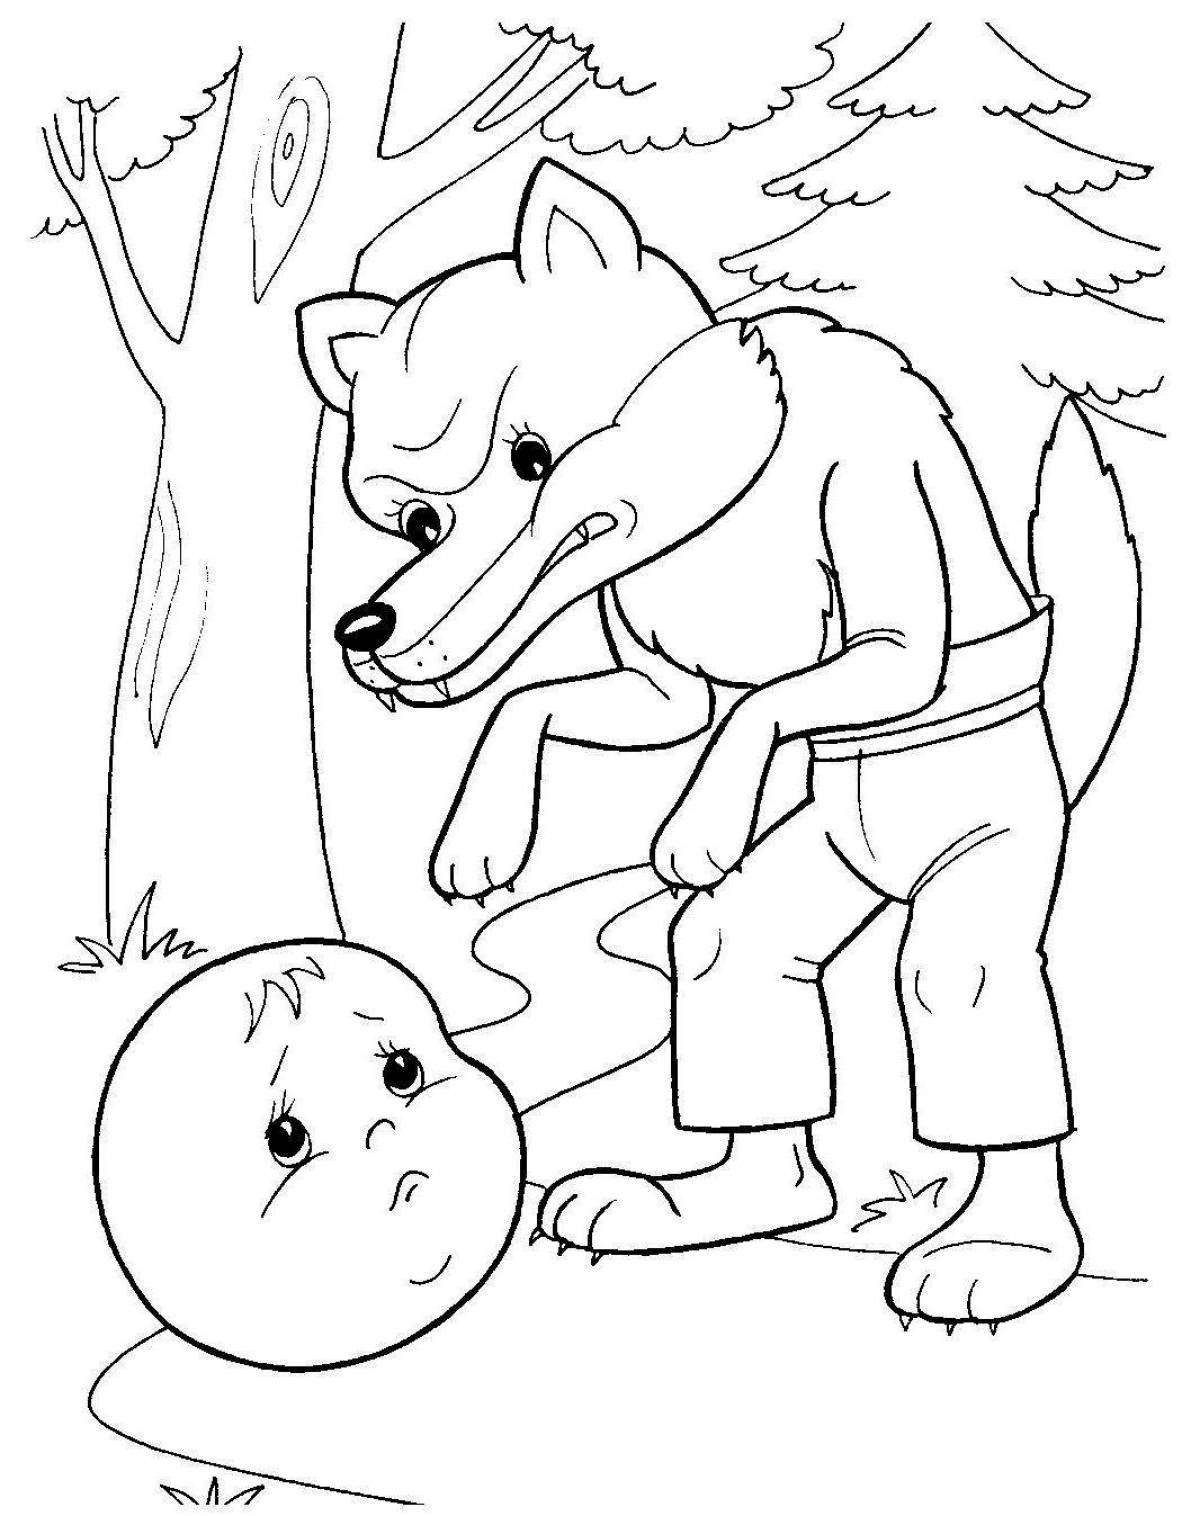 Adorable fox and rabbit coloring page